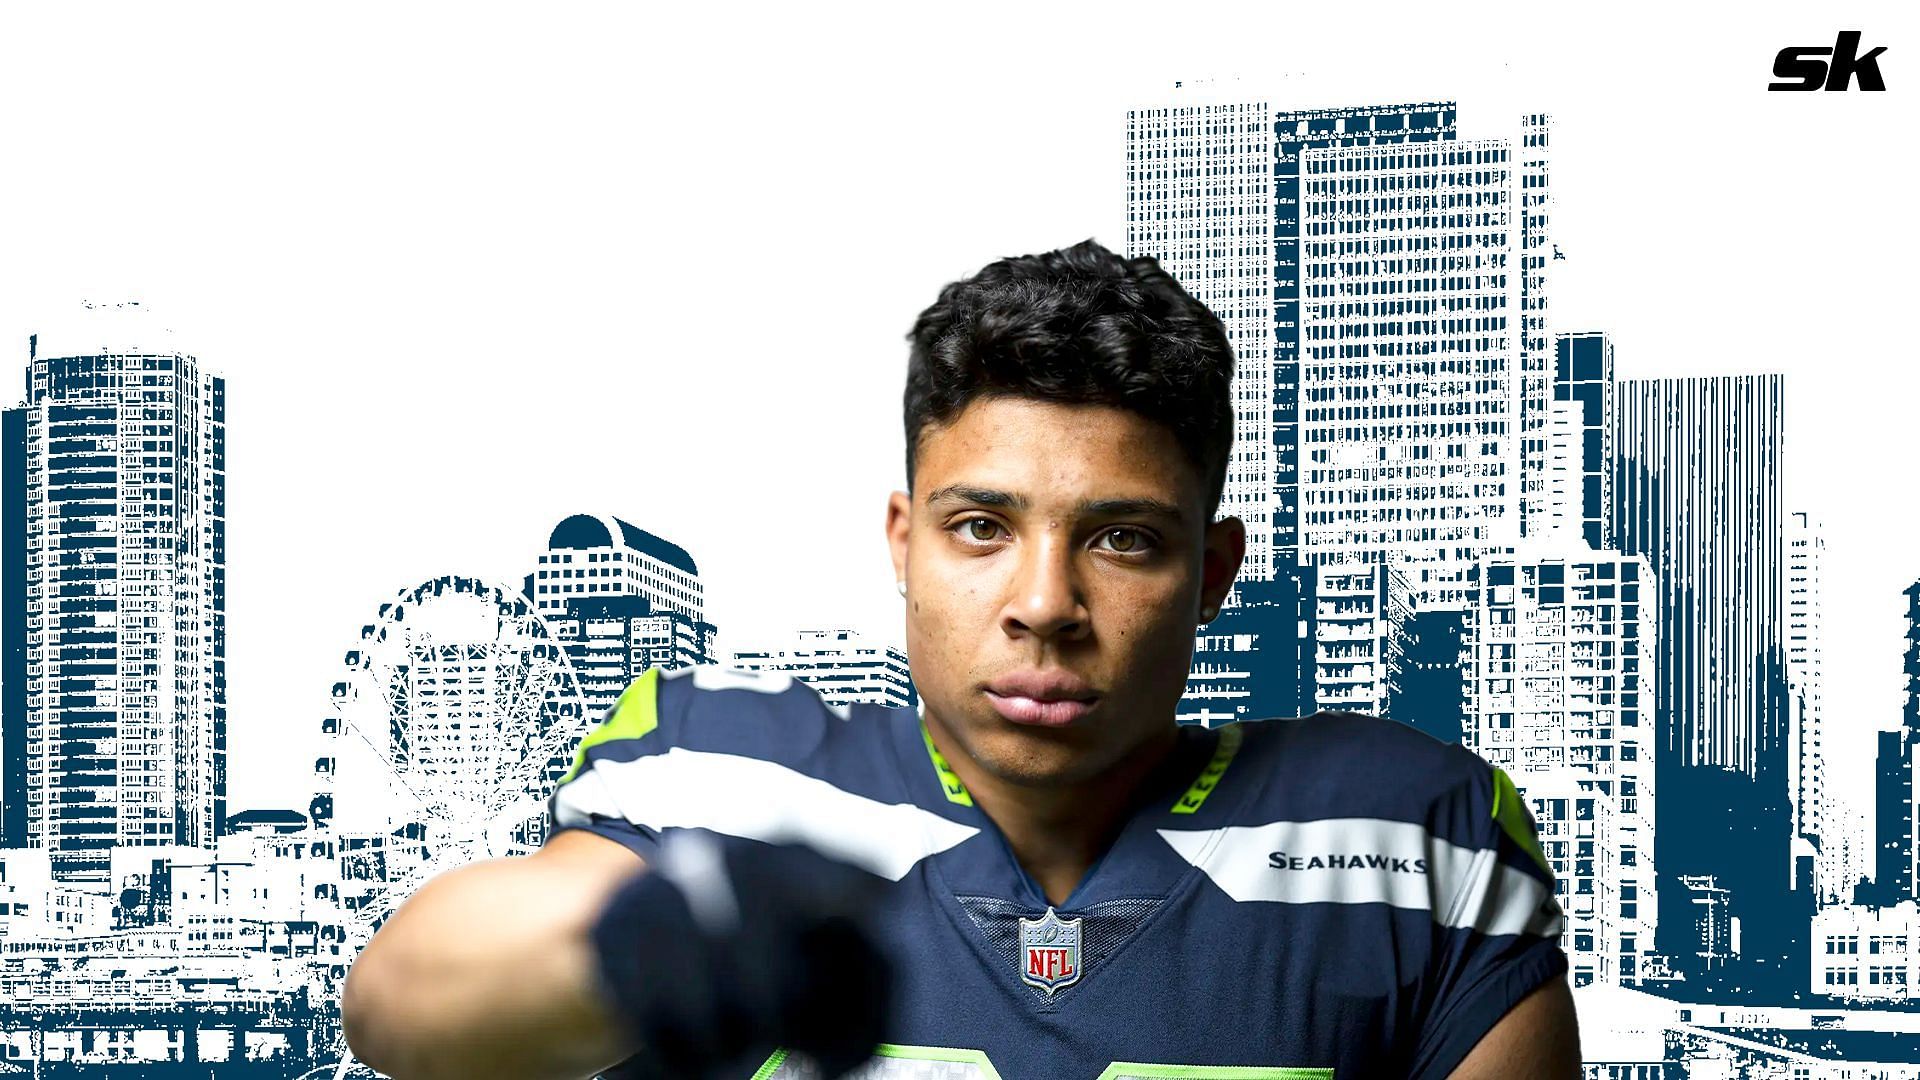 Seahawks rookie Zach Charbonnet reveals which NFL star he models his game on